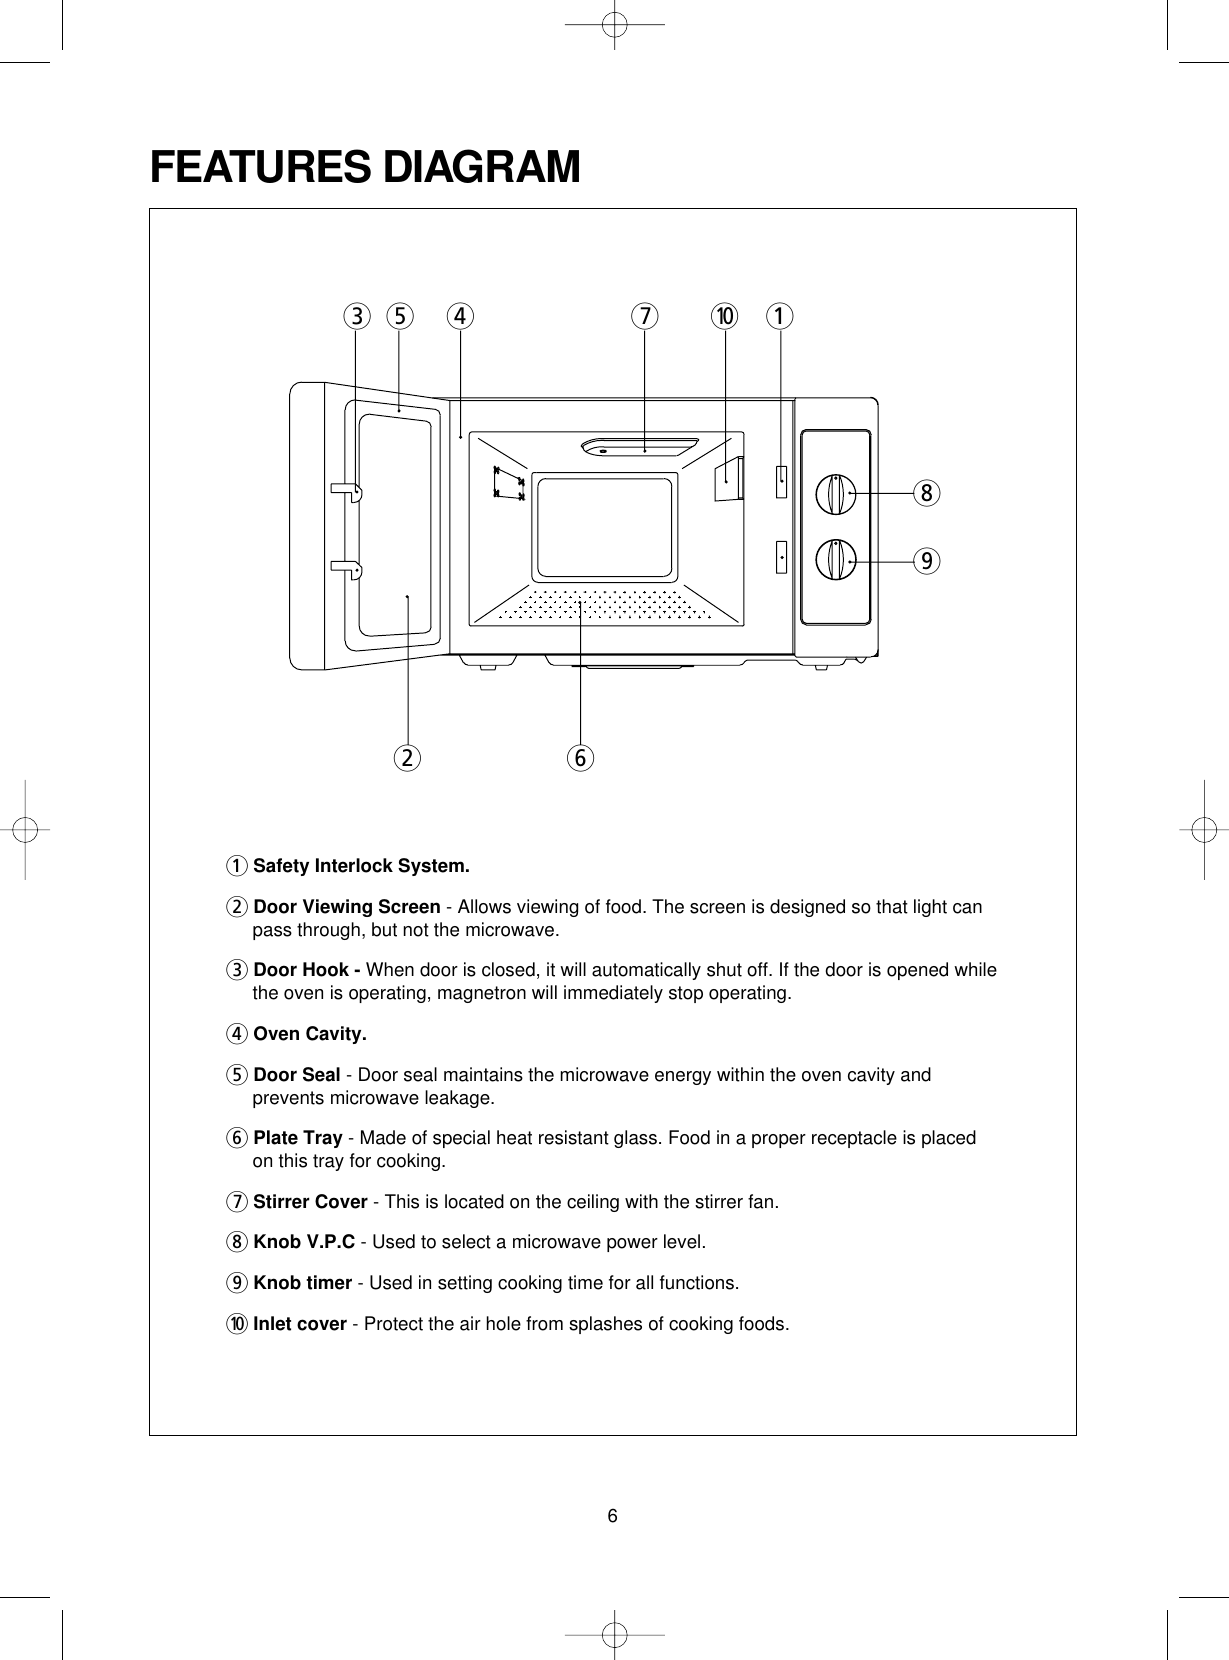 6FEATURES DIAGRAM1Safety Interlock System.2Door Viewing Screen - Allows viewing of food. The screen is designed so that light canpass through, but not the microwave. 3Door Hook - When door is closed, it will automatically shut off. If the door is opened whilethe oven is operating, magnetron will immediately stop operating.4Oven Cavity.5Door Seal - Door seal maintains the microwave energy within the oven cavity andprevents microwave leakage.6Plate Tray - Made of special heat resistant glass. Food in a proper receptacle is placedon this tray for cooking.7Stirrer Cover - This is located on the ceiling with the stirrer fan.8Knob V.P.C - Used to select a microwave power level.9Knob timer - Used in setting cooking time for all functions.0Inlet cover - Protect the air hole from splashes of cooking foods.  3526470189